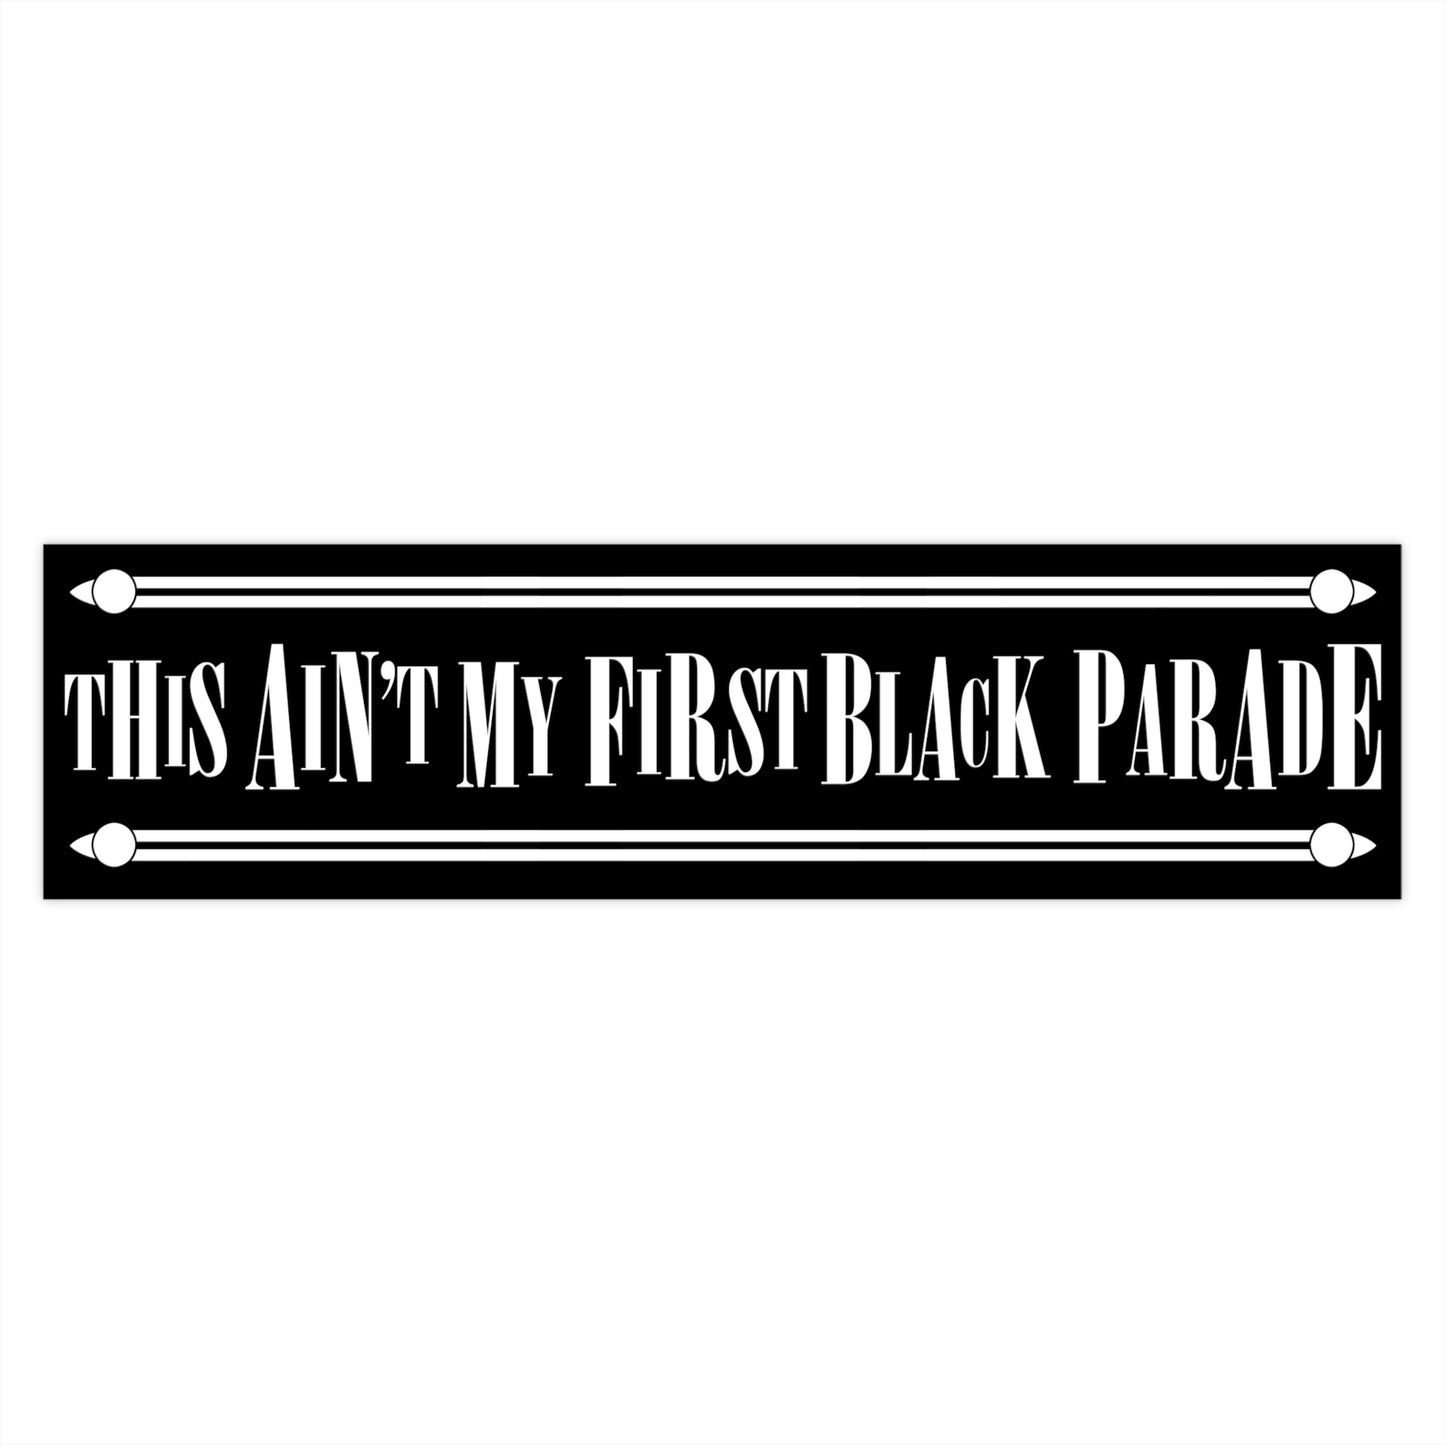 This Ain't My First Black Parade bumper sticker